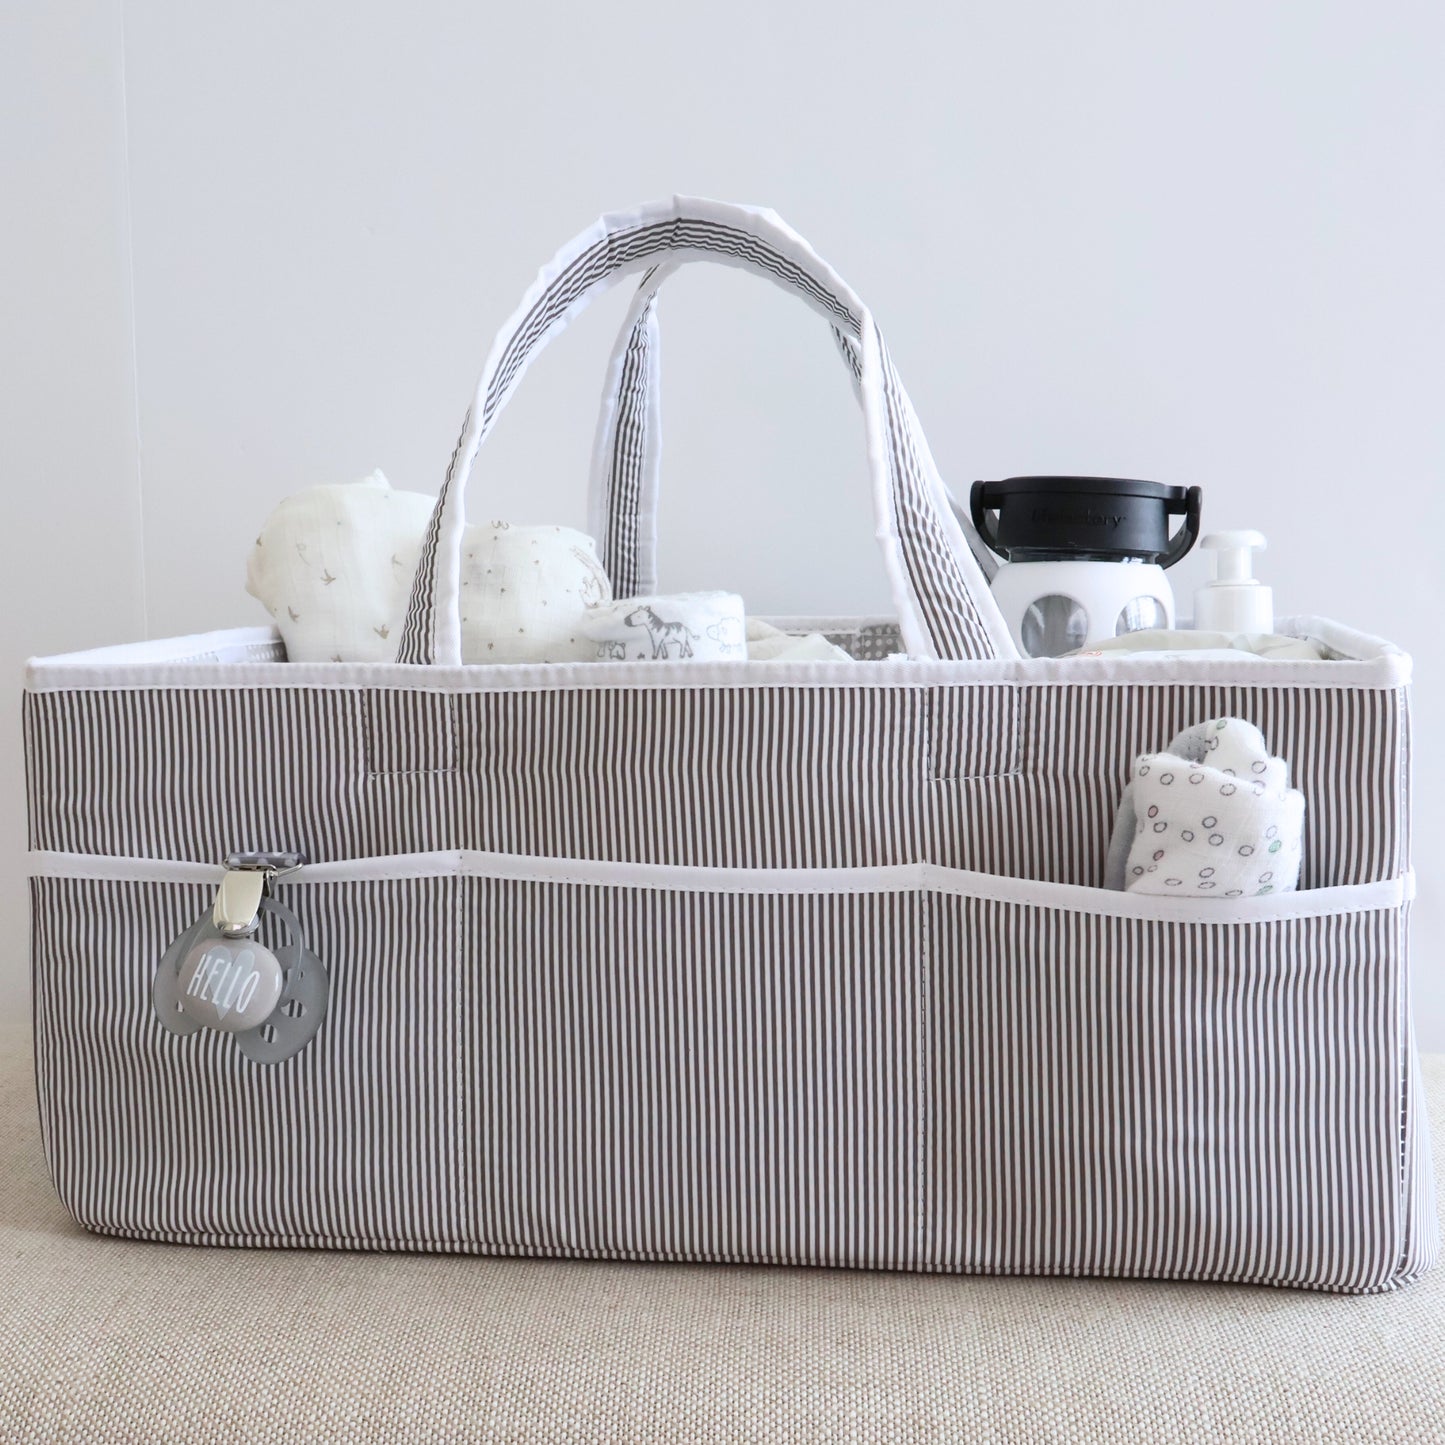 Extra Large Diaper Caddy - Gray/Gray